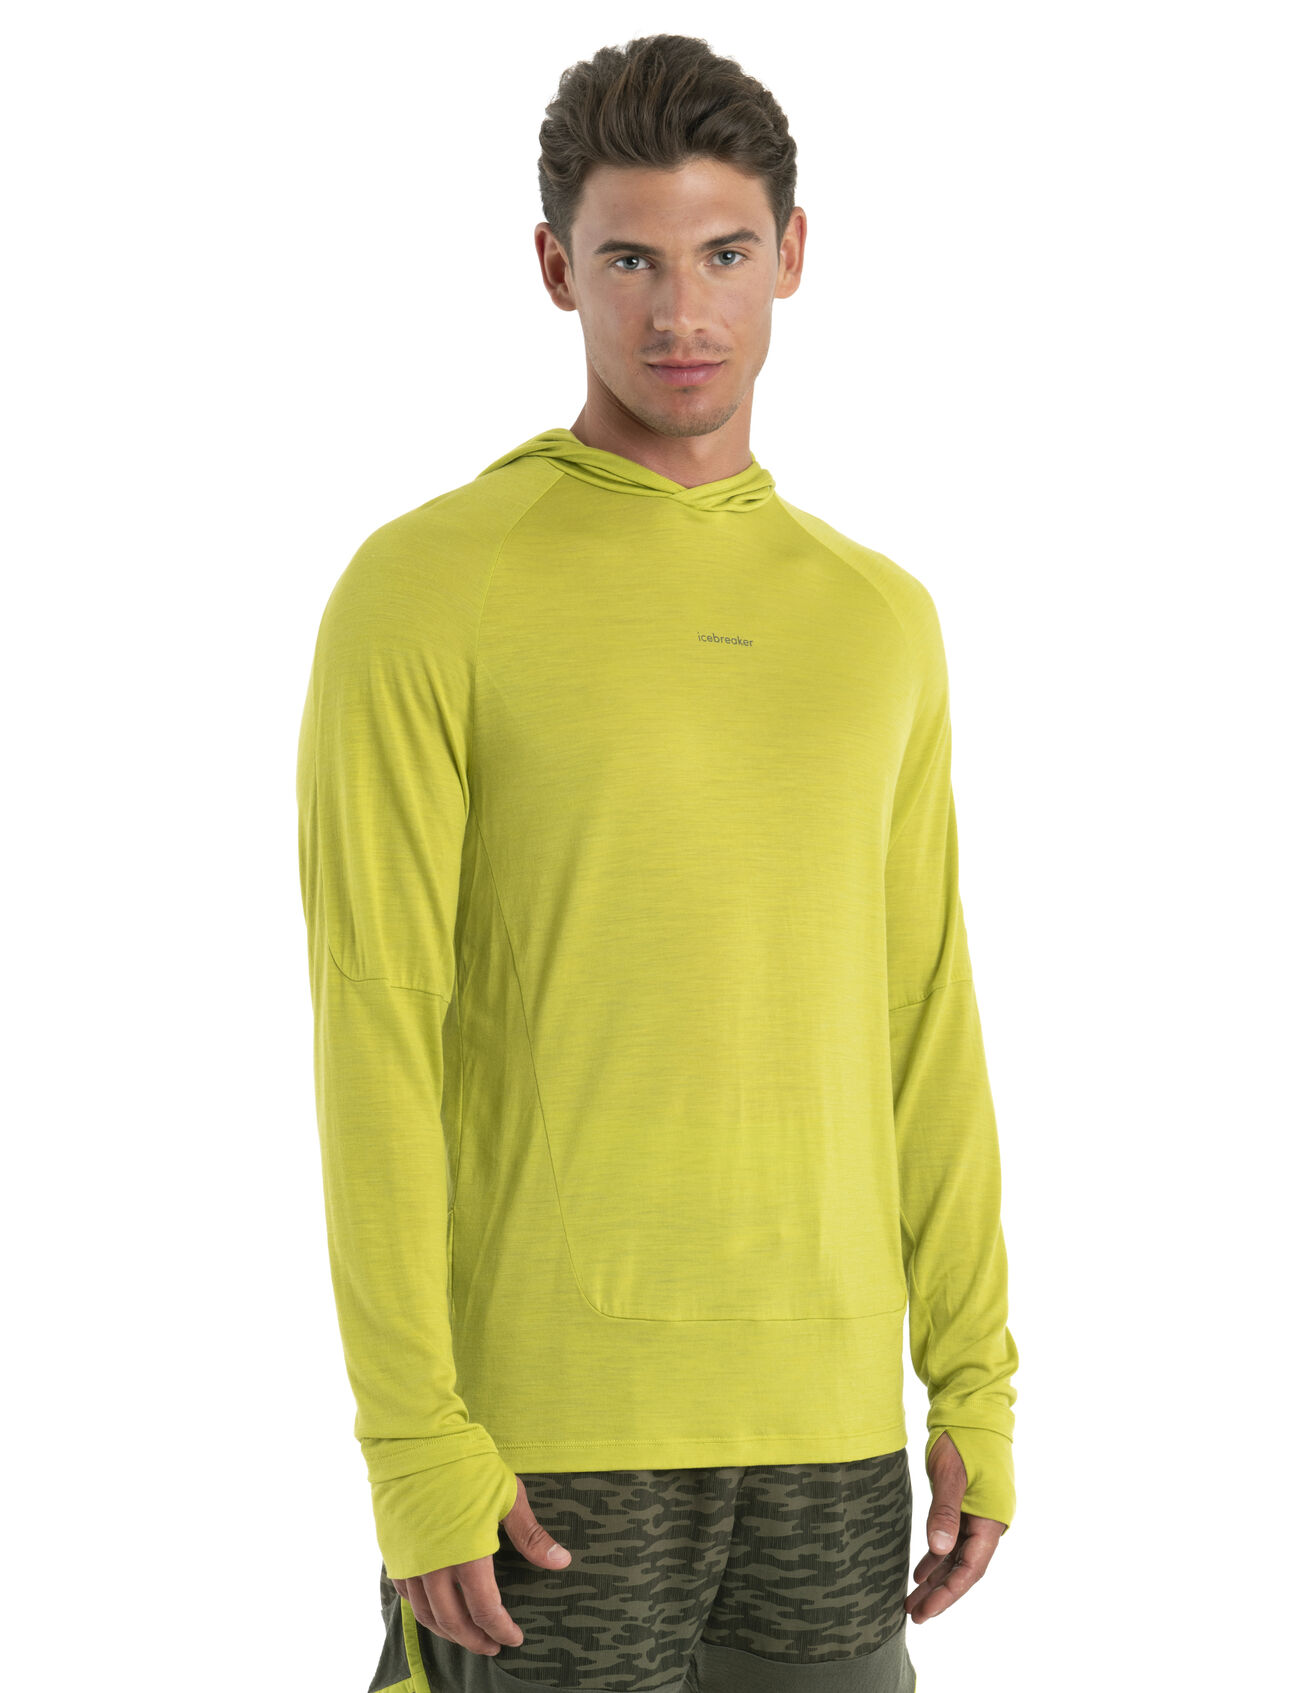 Mens 125 Cool-Lite™ Merino Long Sleeve Hoodie A lightweight and breathable performance hoodie designed for aerobic days outside, the Cool-Lite™ Hoodie features our moisture-wicking Cool-Lite™ merino jersey fabric.